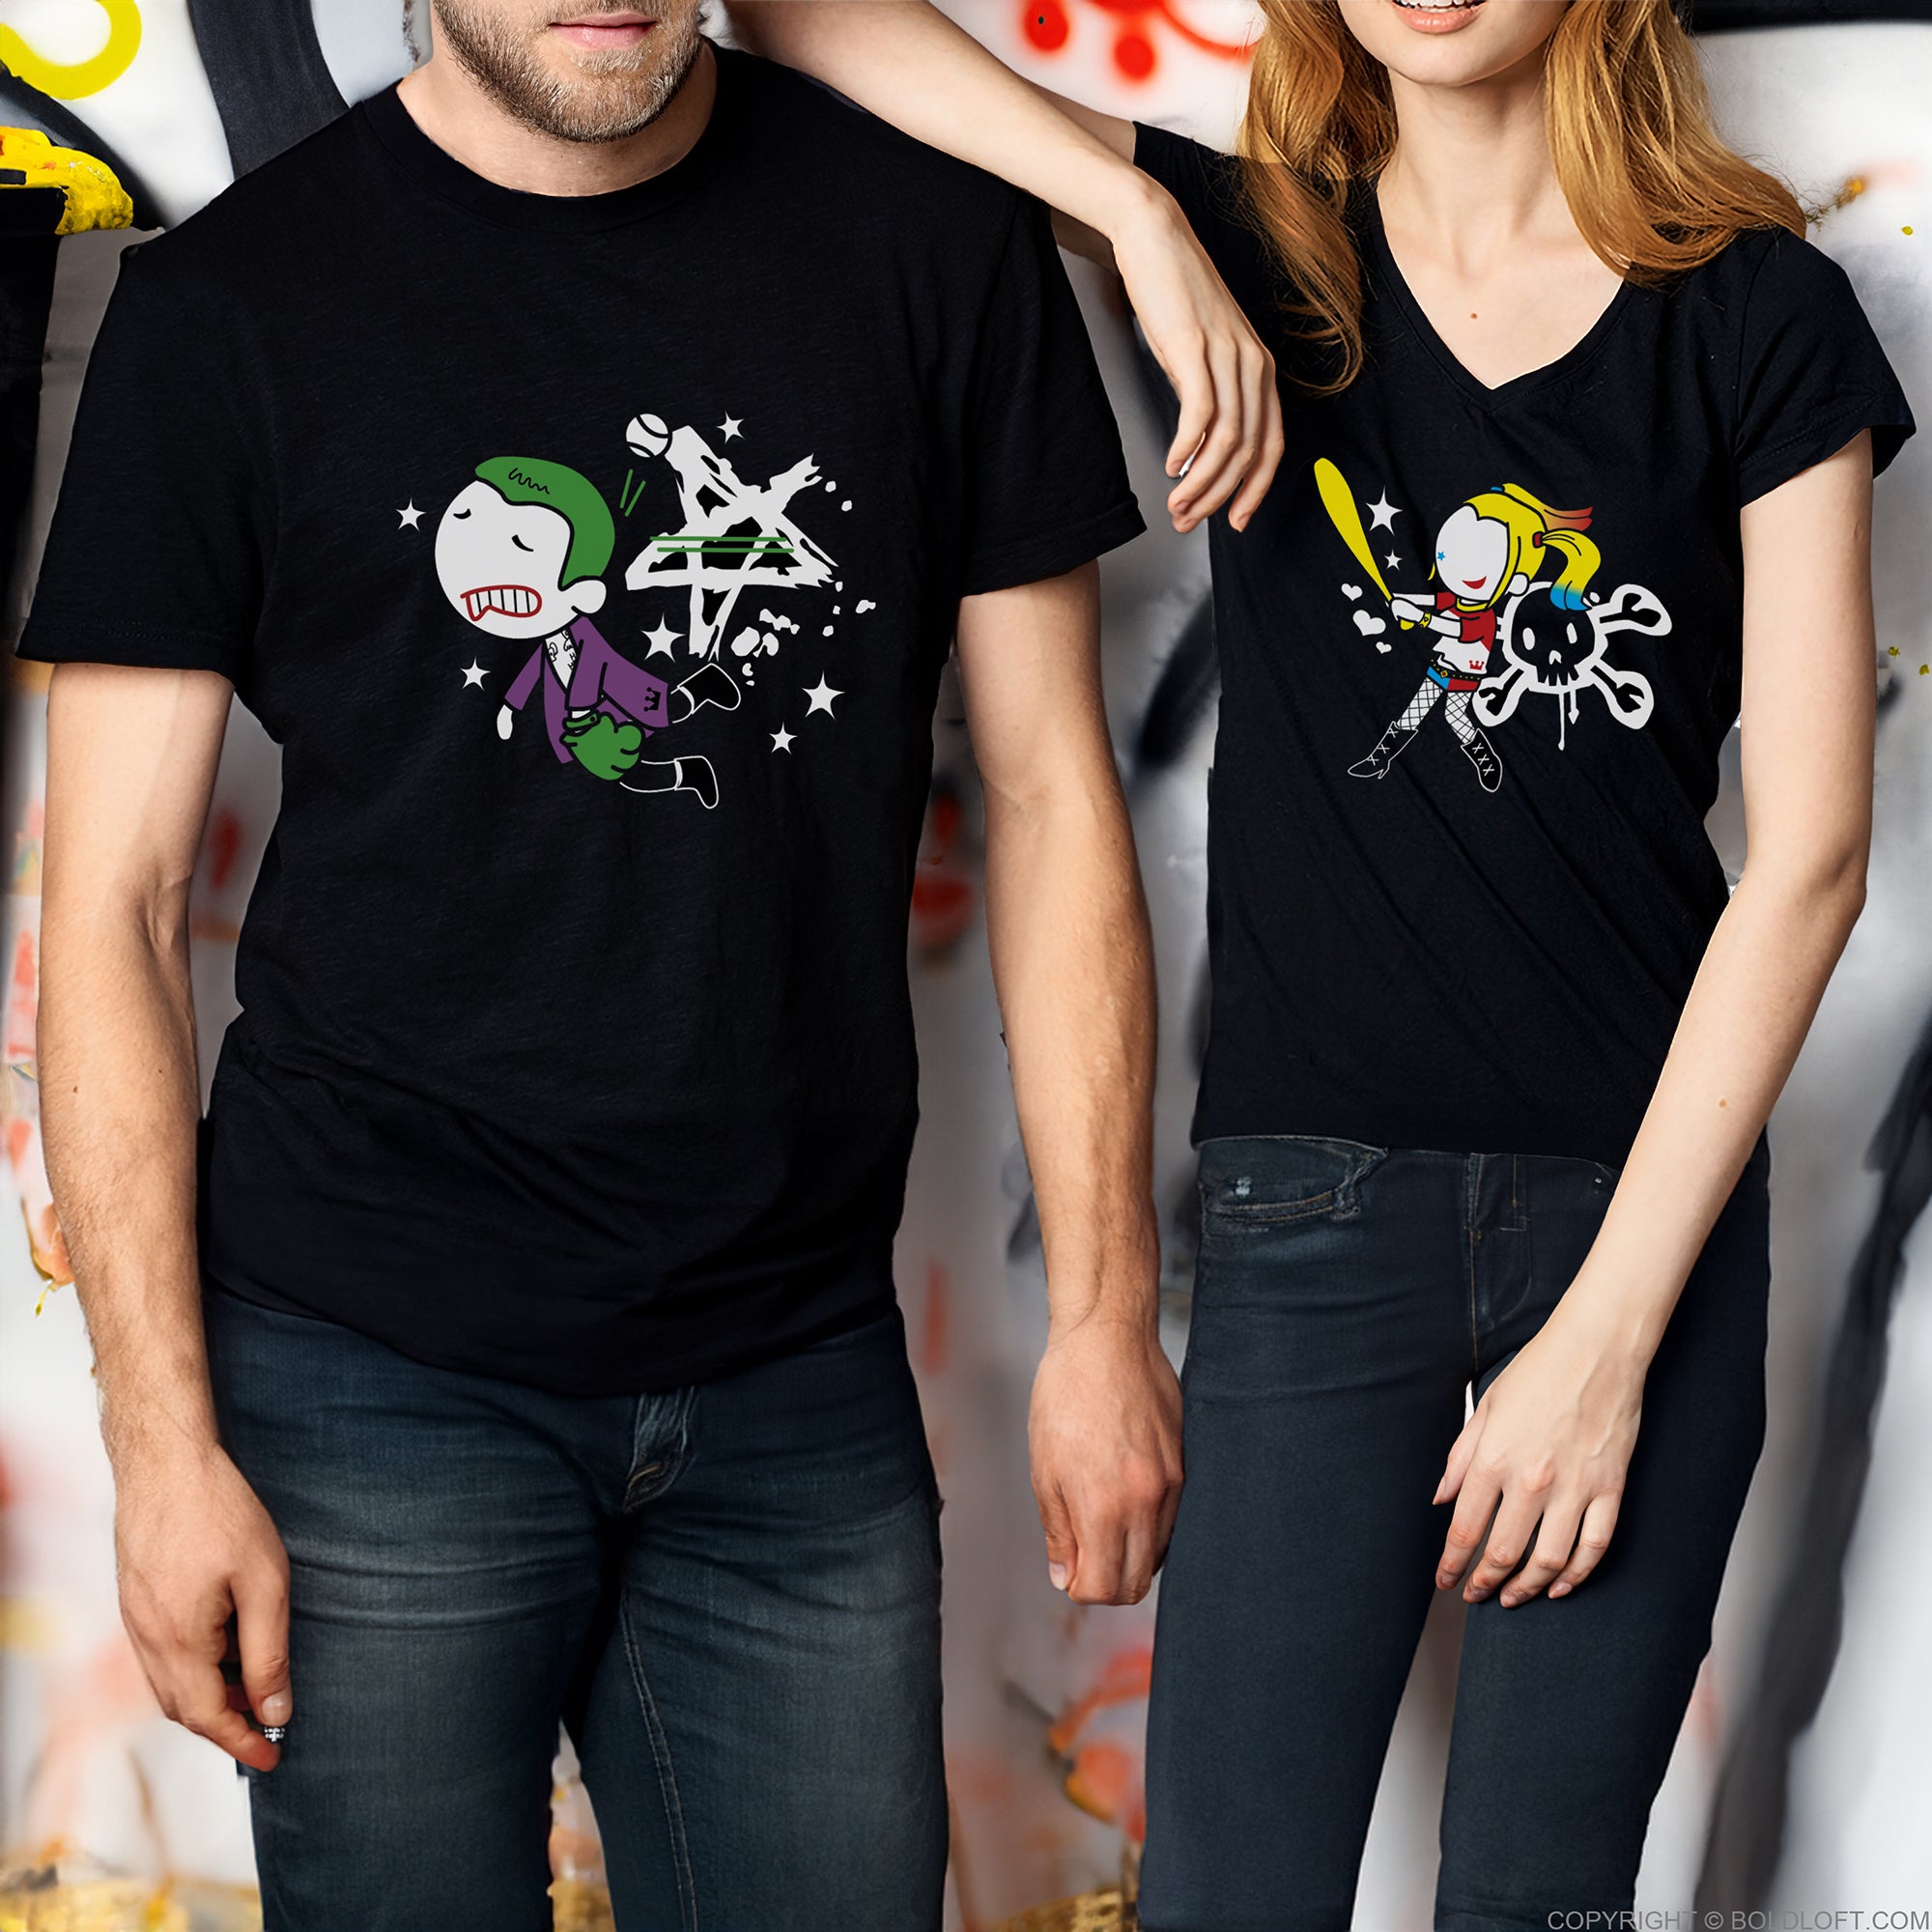 BoldLoft My One and Only Madness Couple Shirts, his and hers shirts with cute movie characters